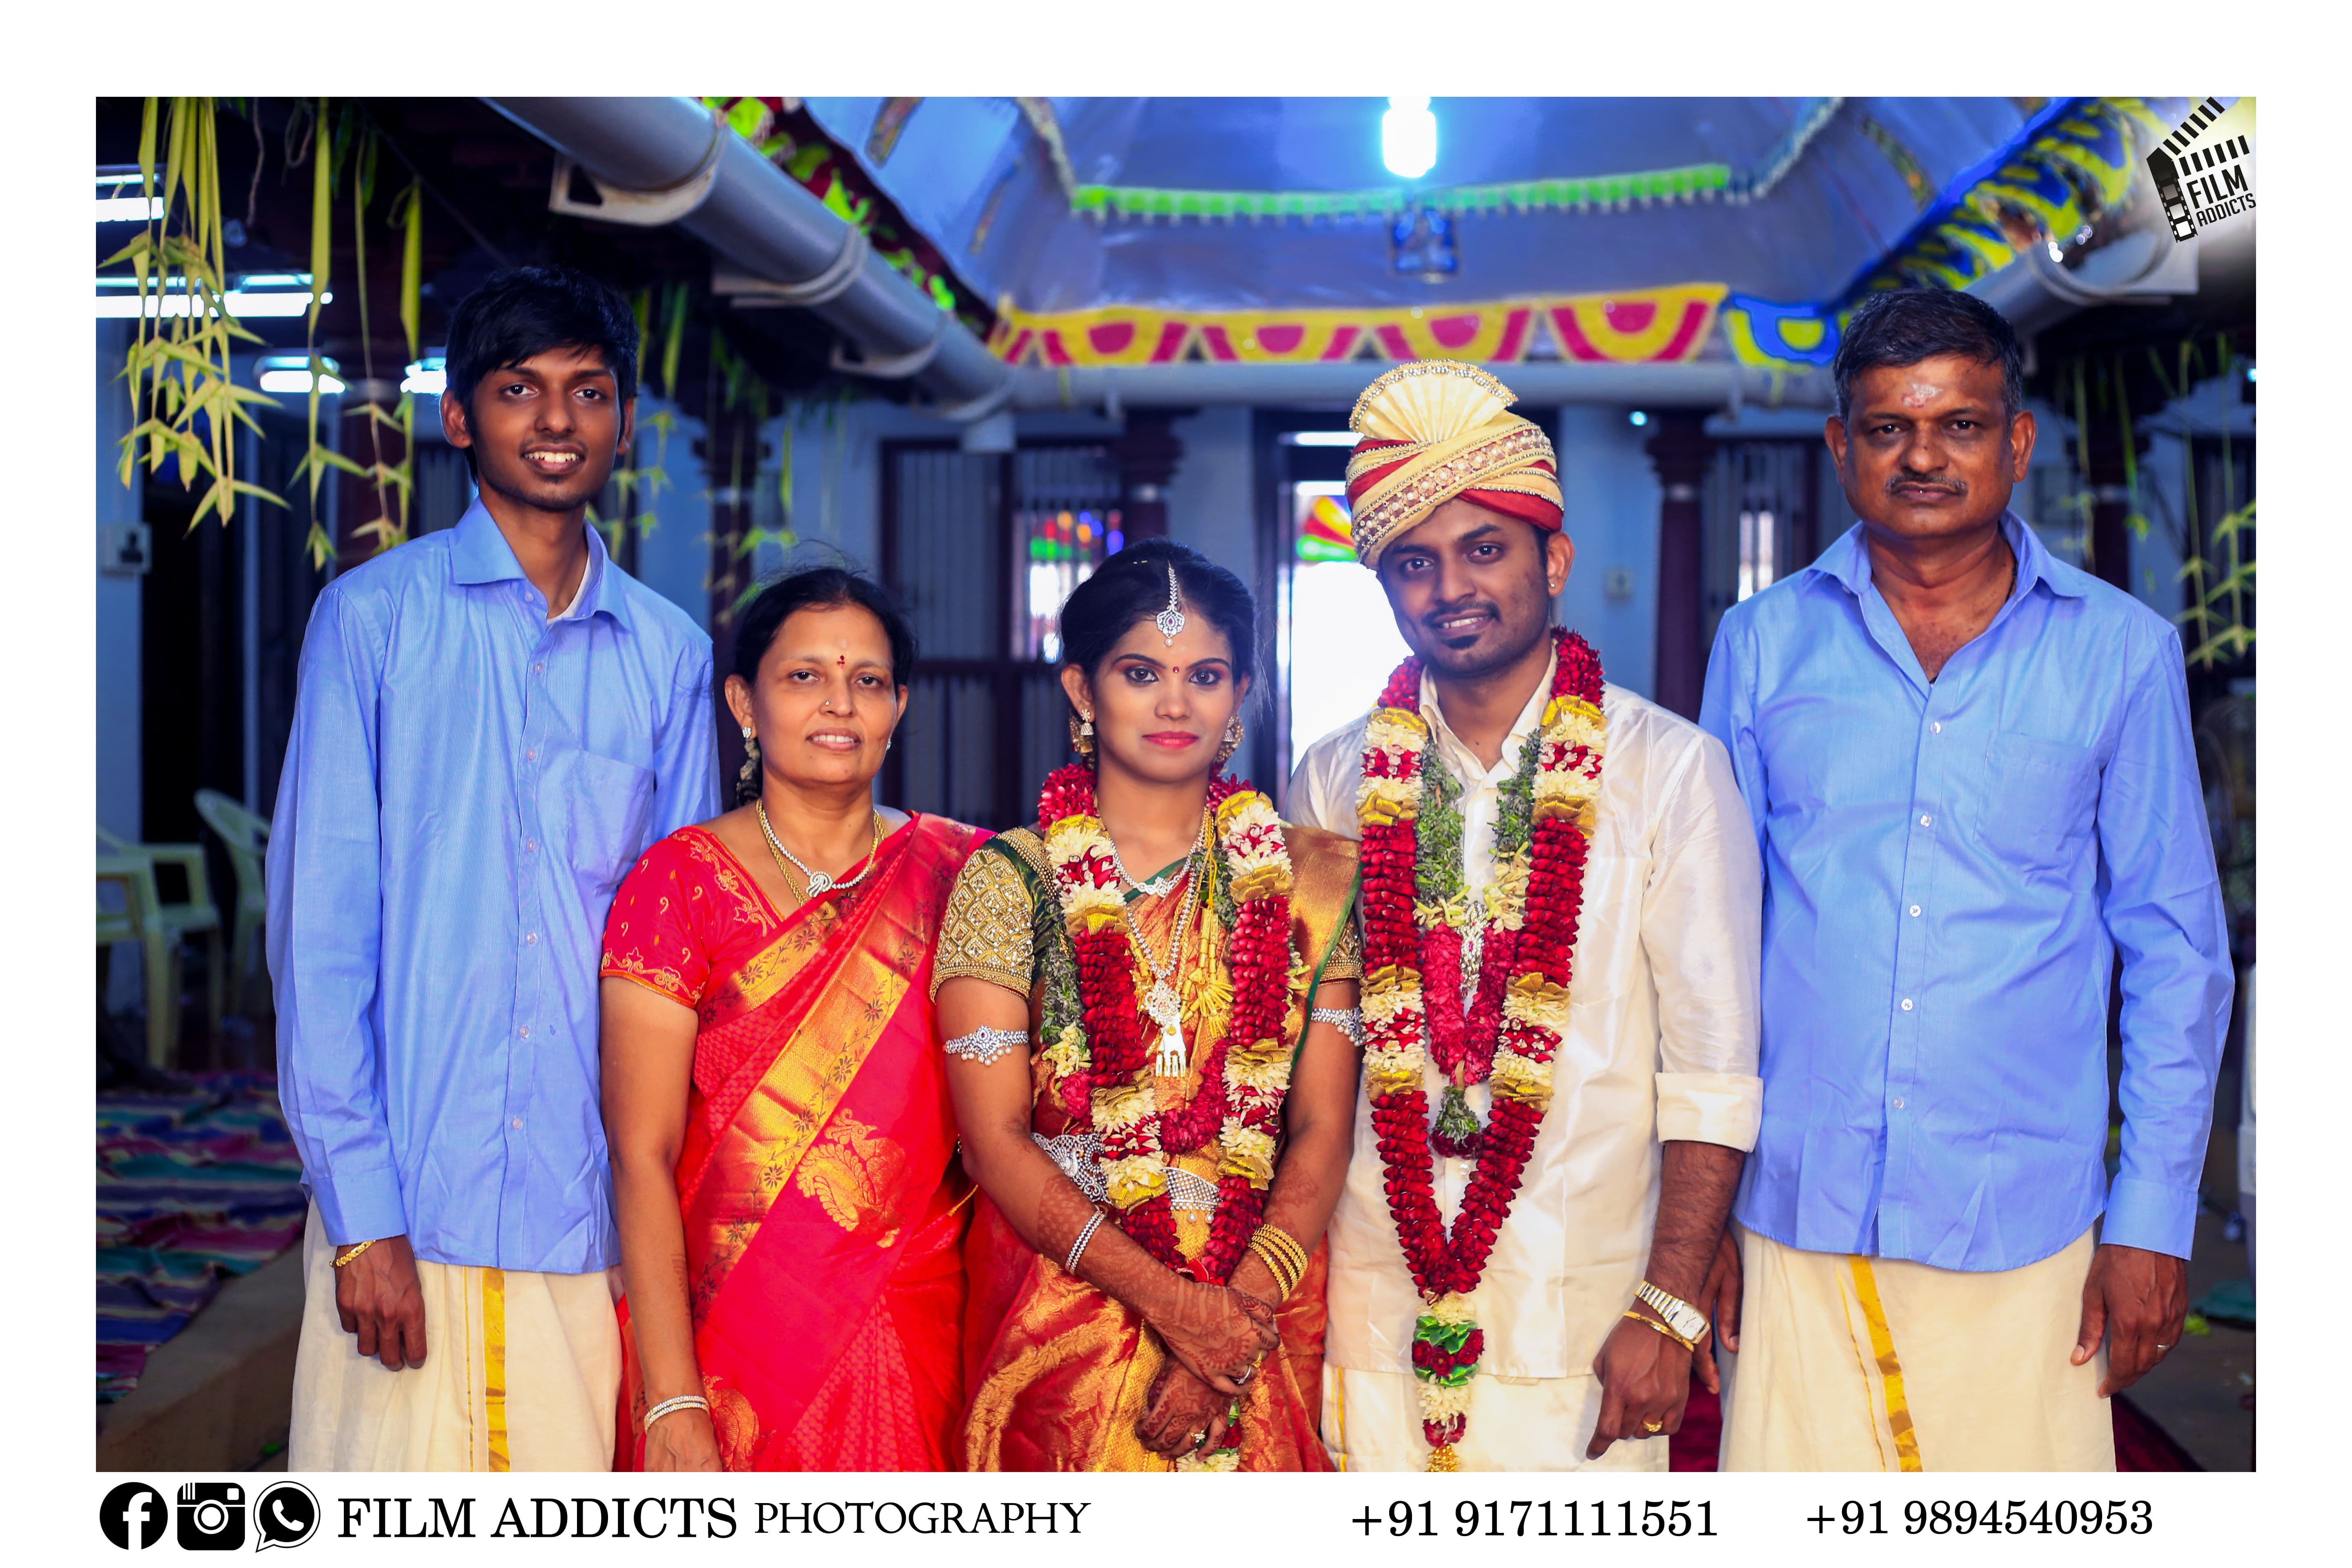 best wedding photographies of chettiar in Theni, Best Wedding Candid photographers in Theni,  Wedding Candid Moments FilmAddicts , Photography FilmAddictsPhotography, best wedding in Theni, Best Candid-shoot in Theni, best moment, Best wedding moments, Best wedding photography in Theni , Best wedding videography in Theni , Best couple shoot , Best candid , Best wedding shoot,  best marriage photographers in Theni , best marriage photography in Theni, best candid photography, best Theni photography, Theni photography , Theni couples , candid shoot, candid , tamilnadu wedding photography, best photographers in Theni, tamilnadu. 